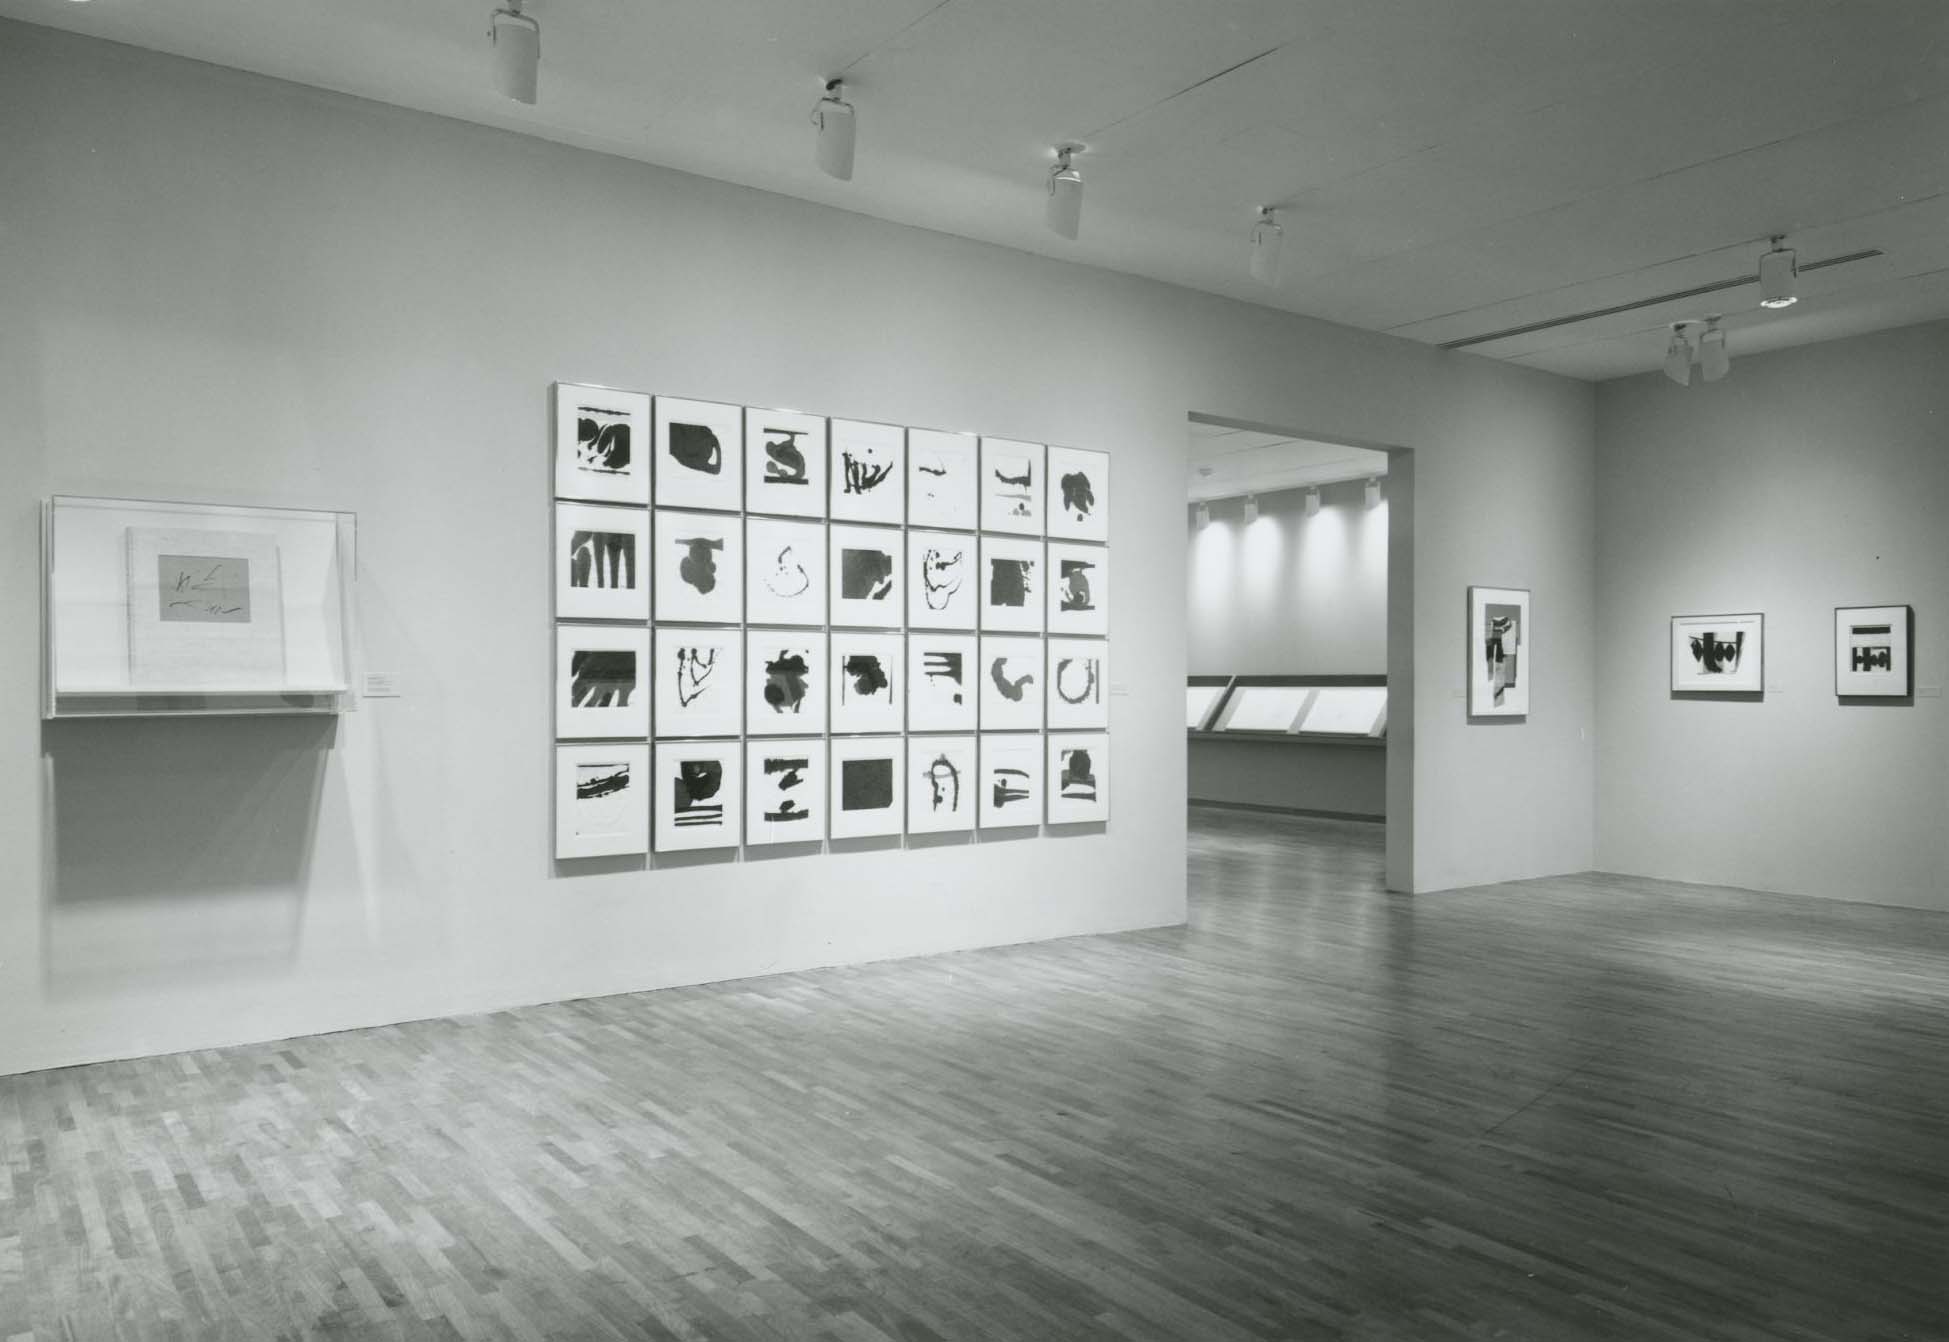 Installation view of Gifts of Works on Paper by Robert Motherwell at the Museum of Modern Art